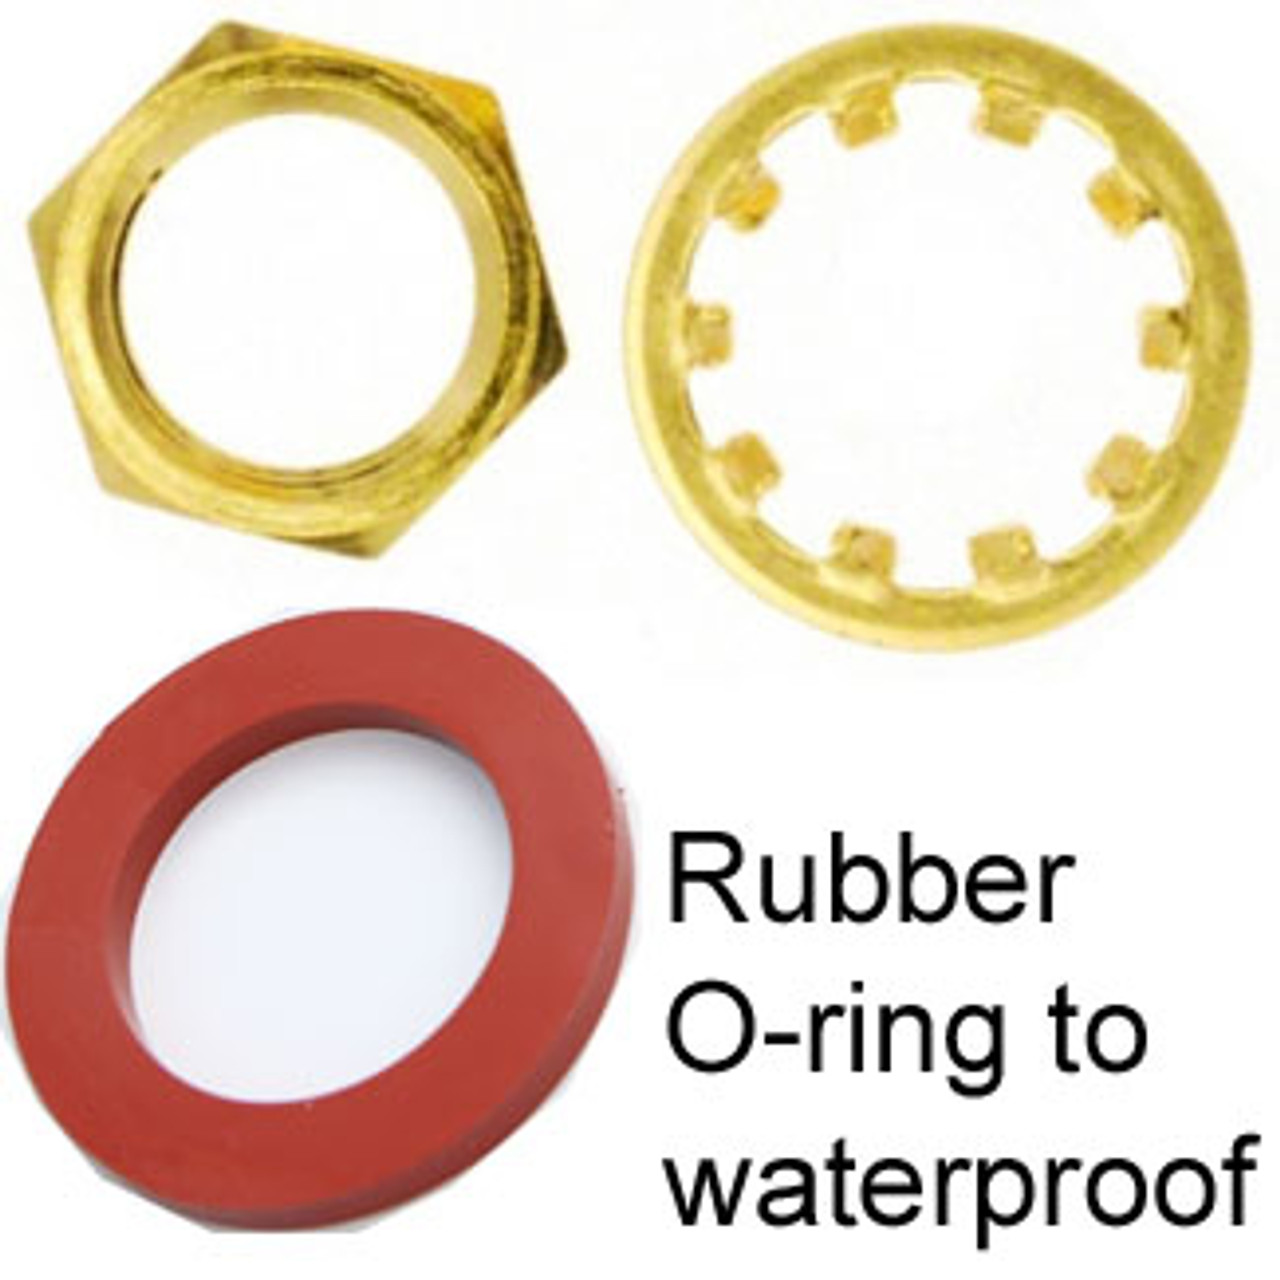 Waterproof Rubber Seal Washer for RP-SMA & SMA to Seal Connector on  Enclosure